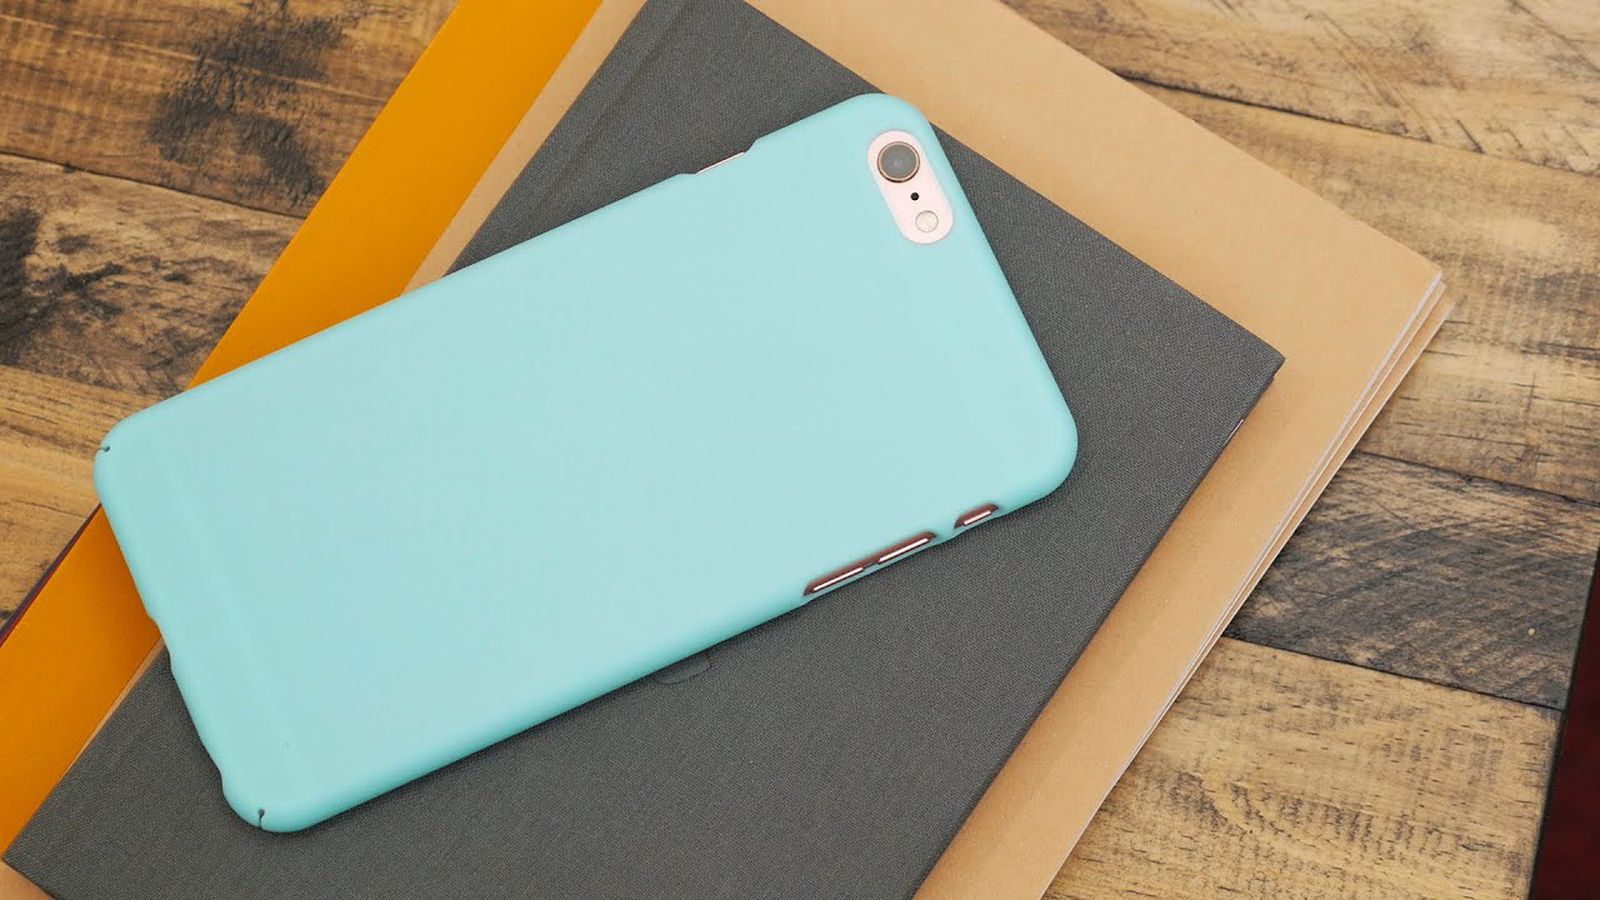 Video Review: SwitchEasy’s Cases for the iPhone 6s and 6s Plus Are Thin and Affordable